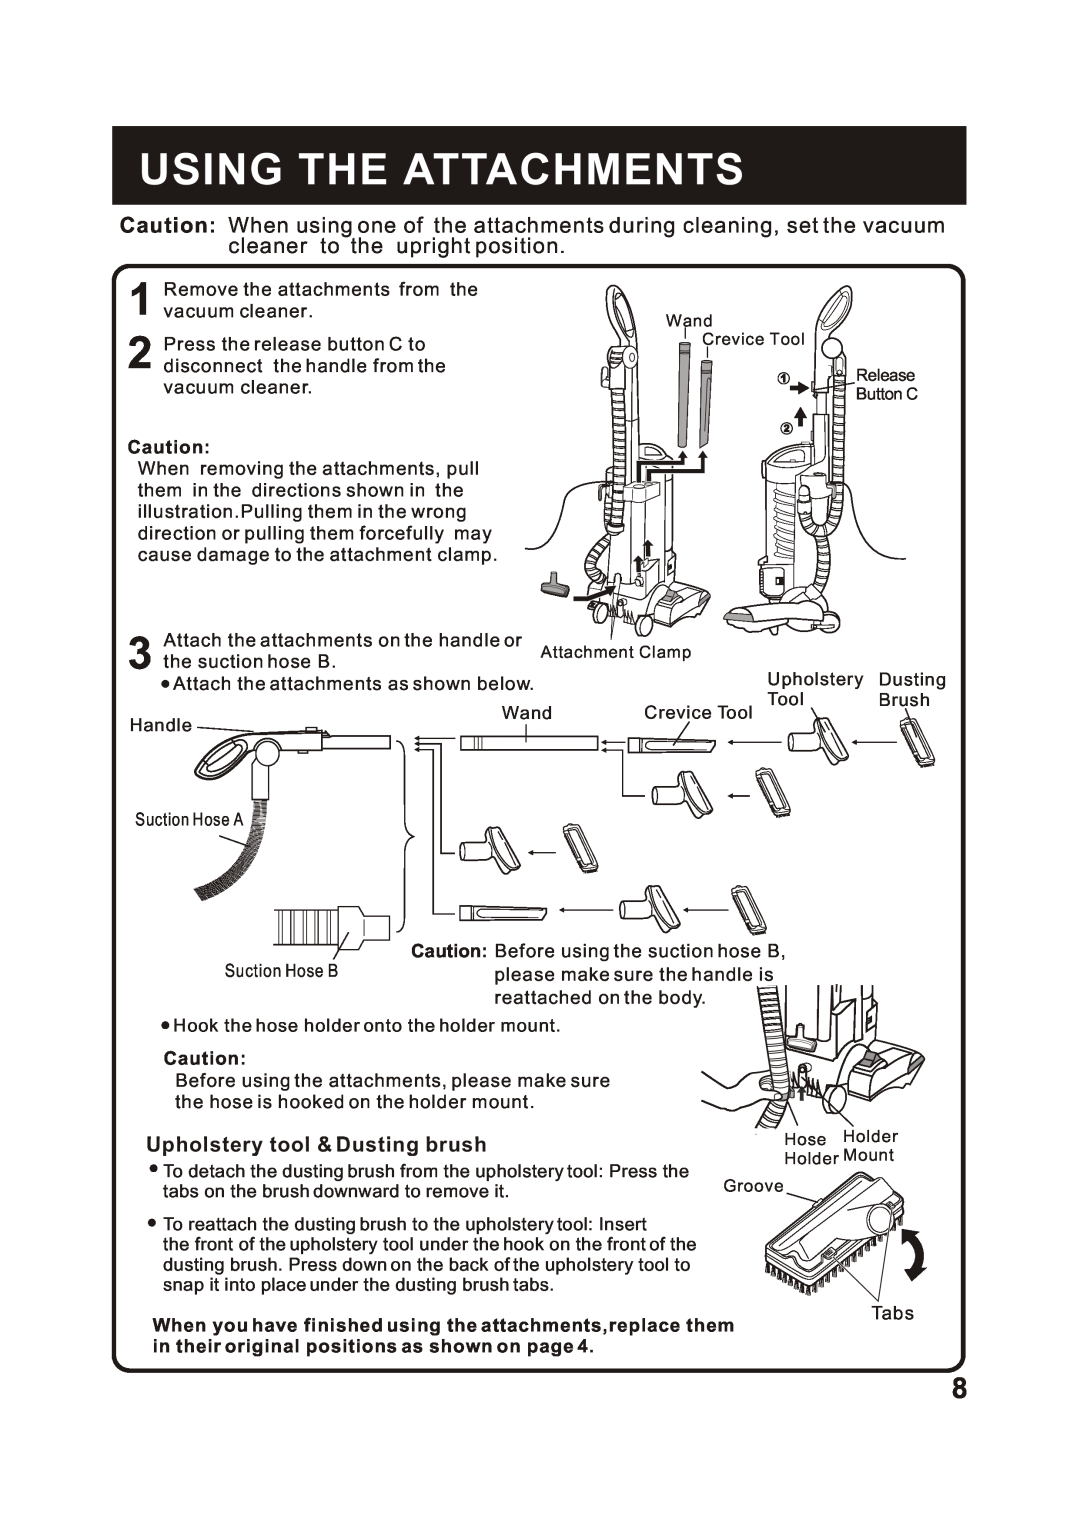 Fantom Vacuum FM743 instruction manual Using The Attachments, Upholstery tool & Dusting brush 